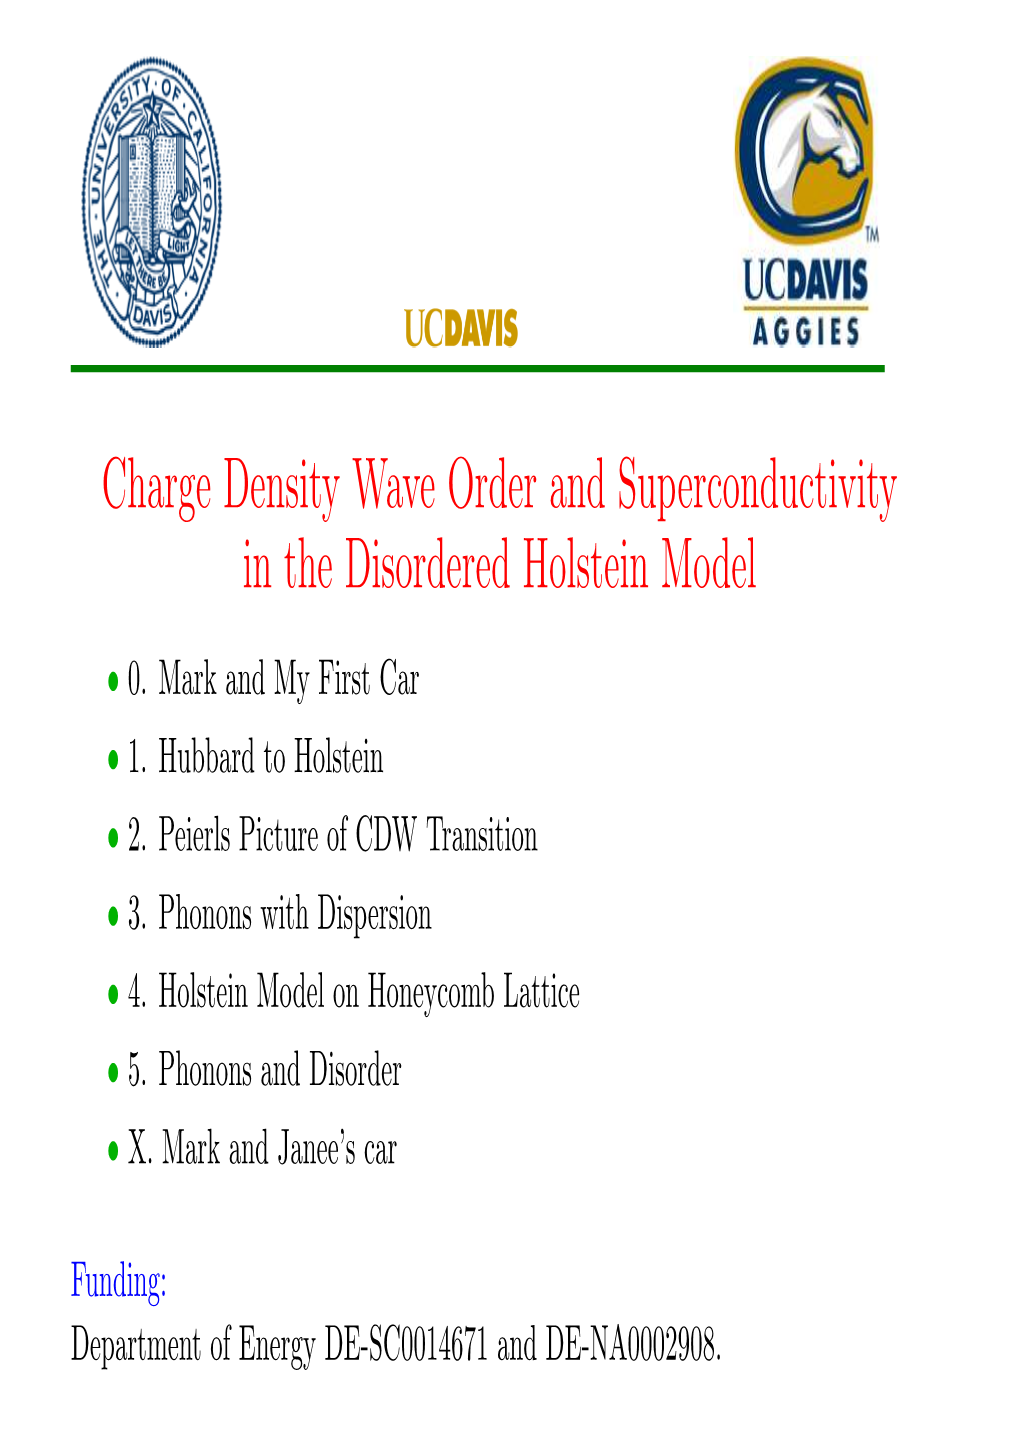 Charge Density Wave Order and Superconductivity in the Disordered Holstein Model